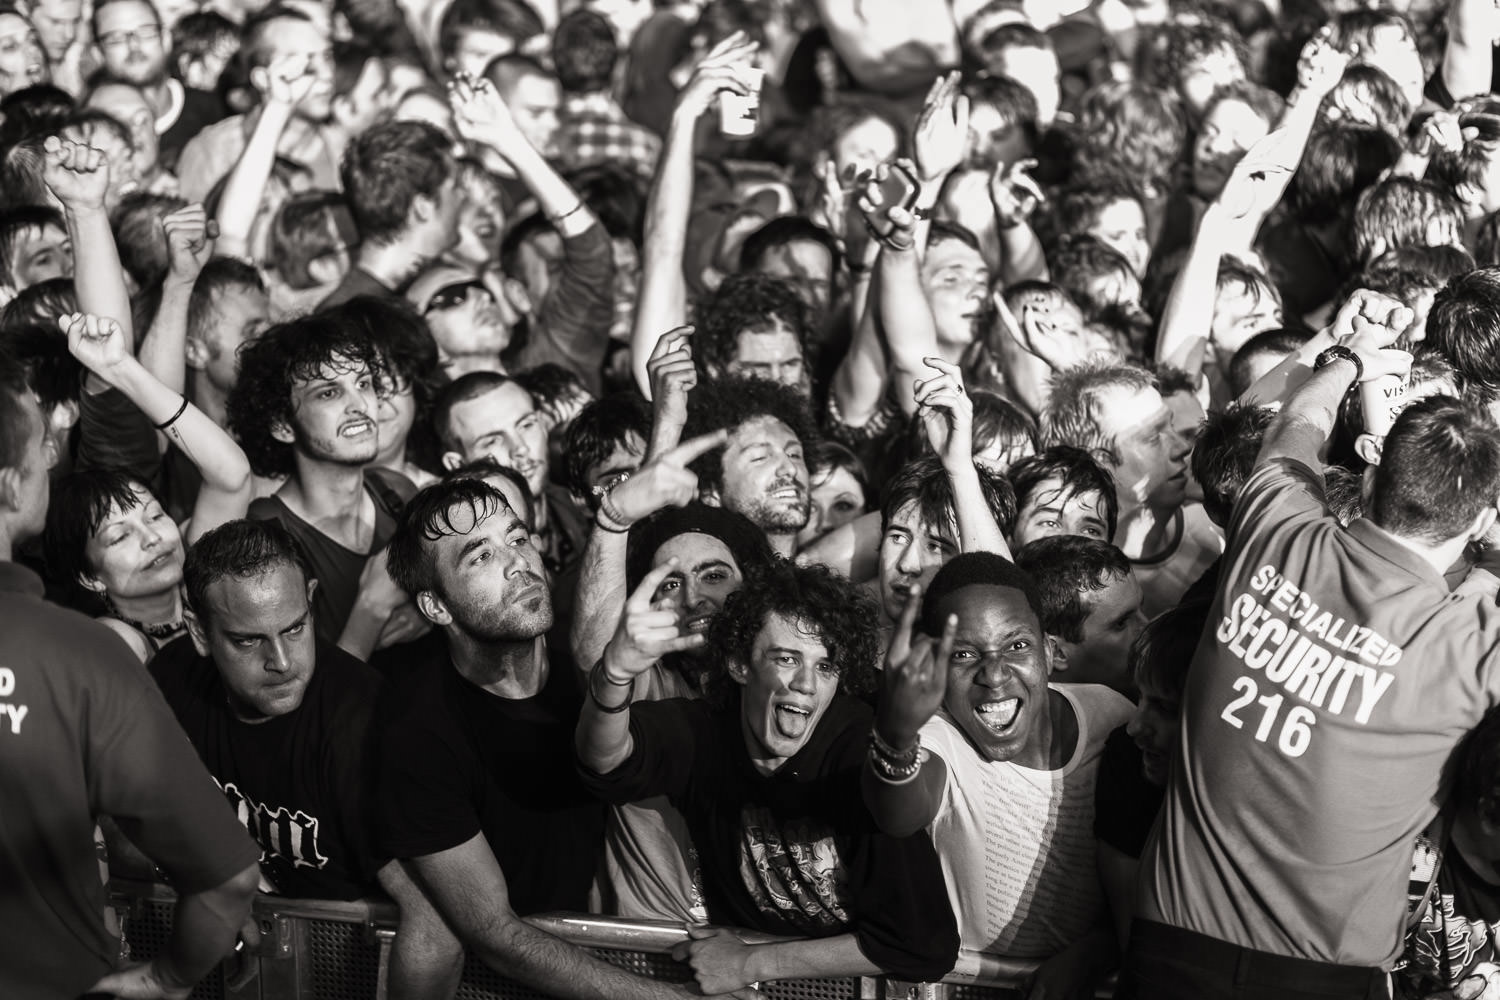 Crowd at the Finsbury Park Rage Against The Machine Gig in 2010.